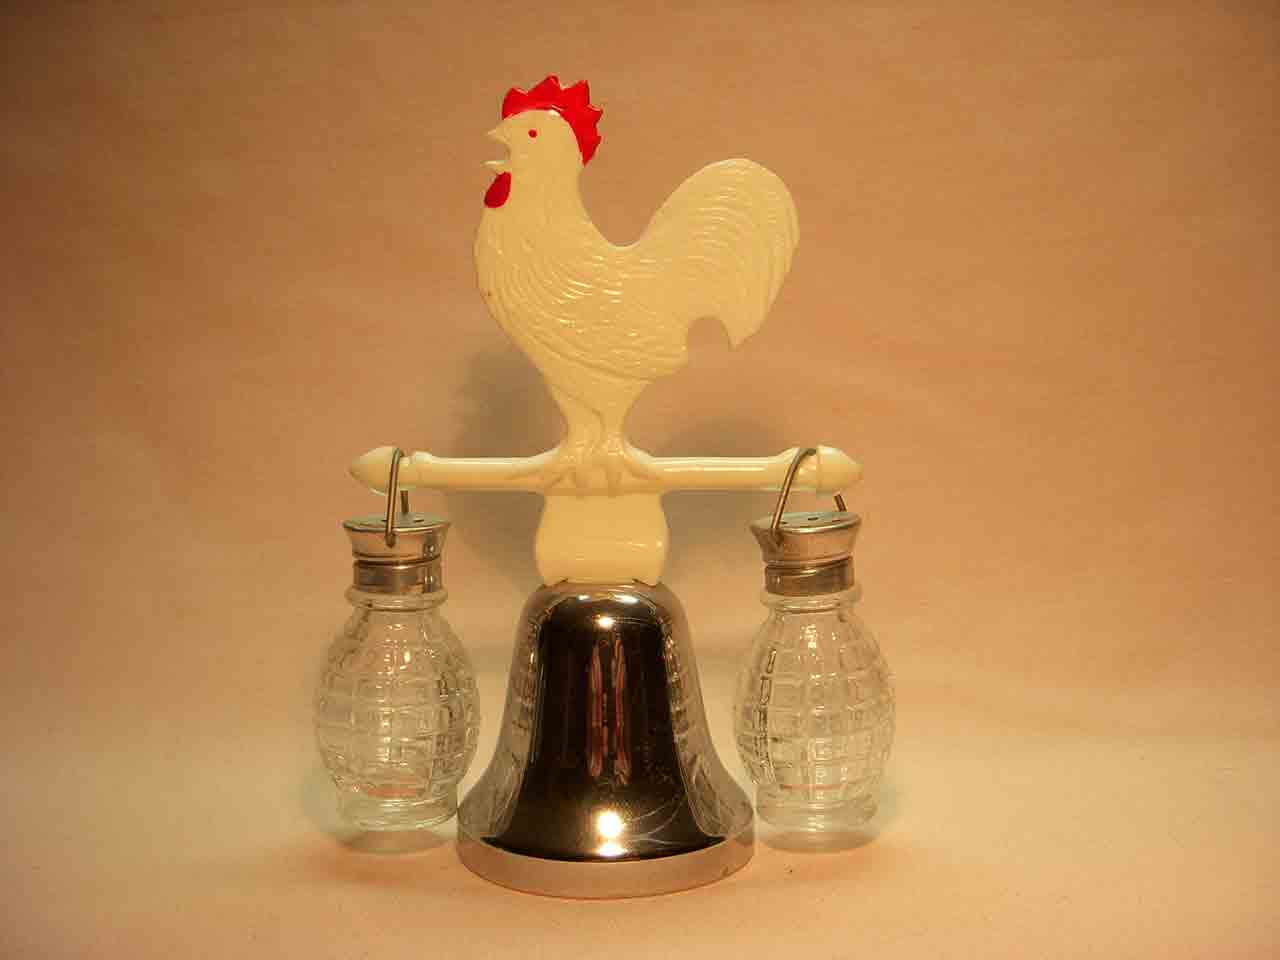 Plastic rooster on dinner bell with hanging salt and pepper shaker